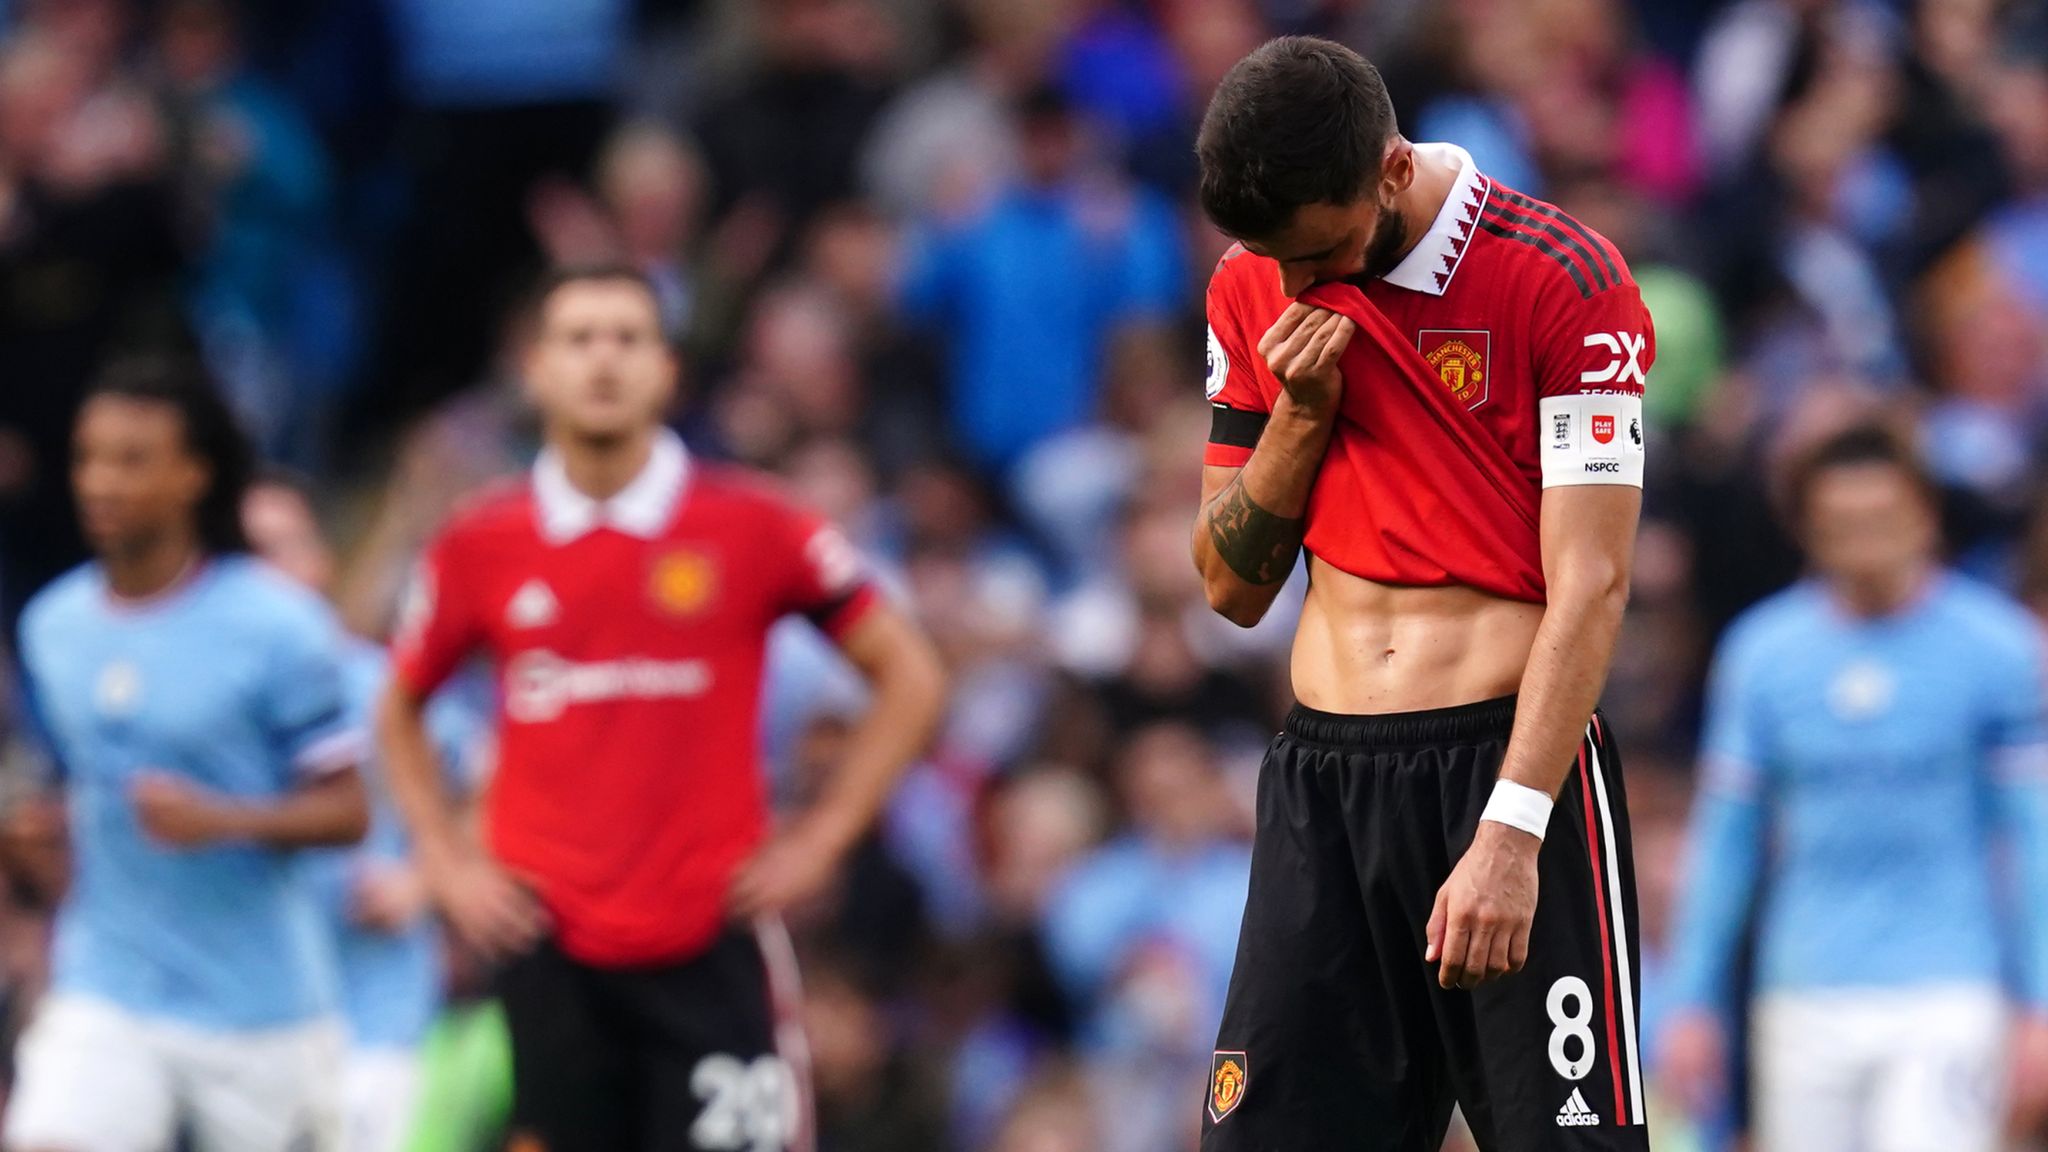 Manchester City 6-3 Manchester United MATCH REPORT